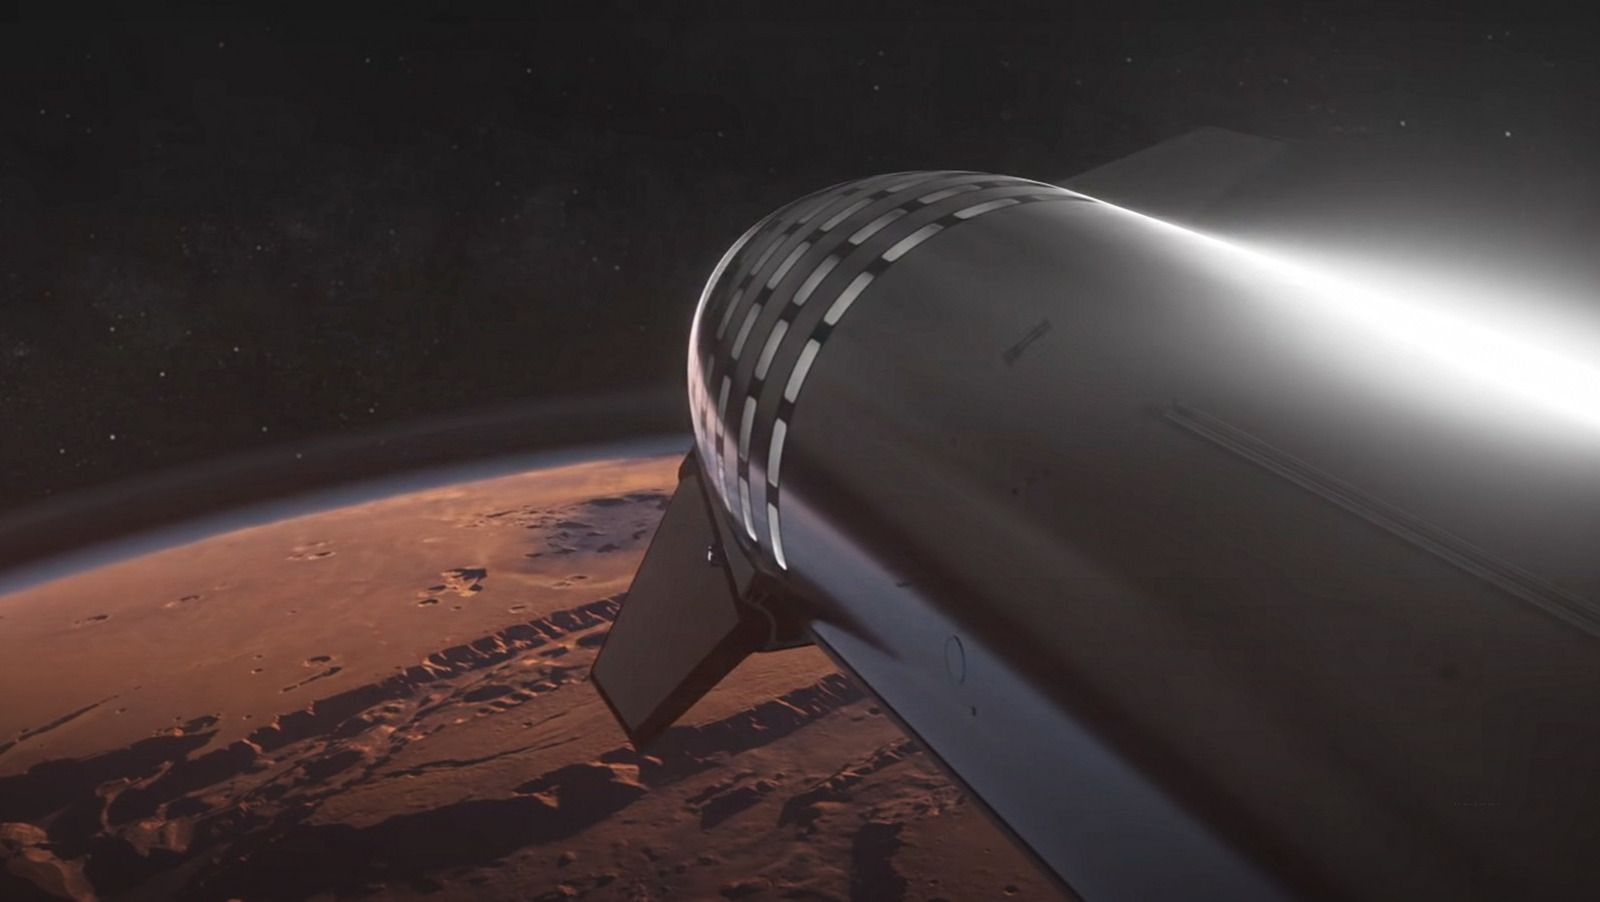 What Elon Musk Has To Teach About Sending A Starship To Mars